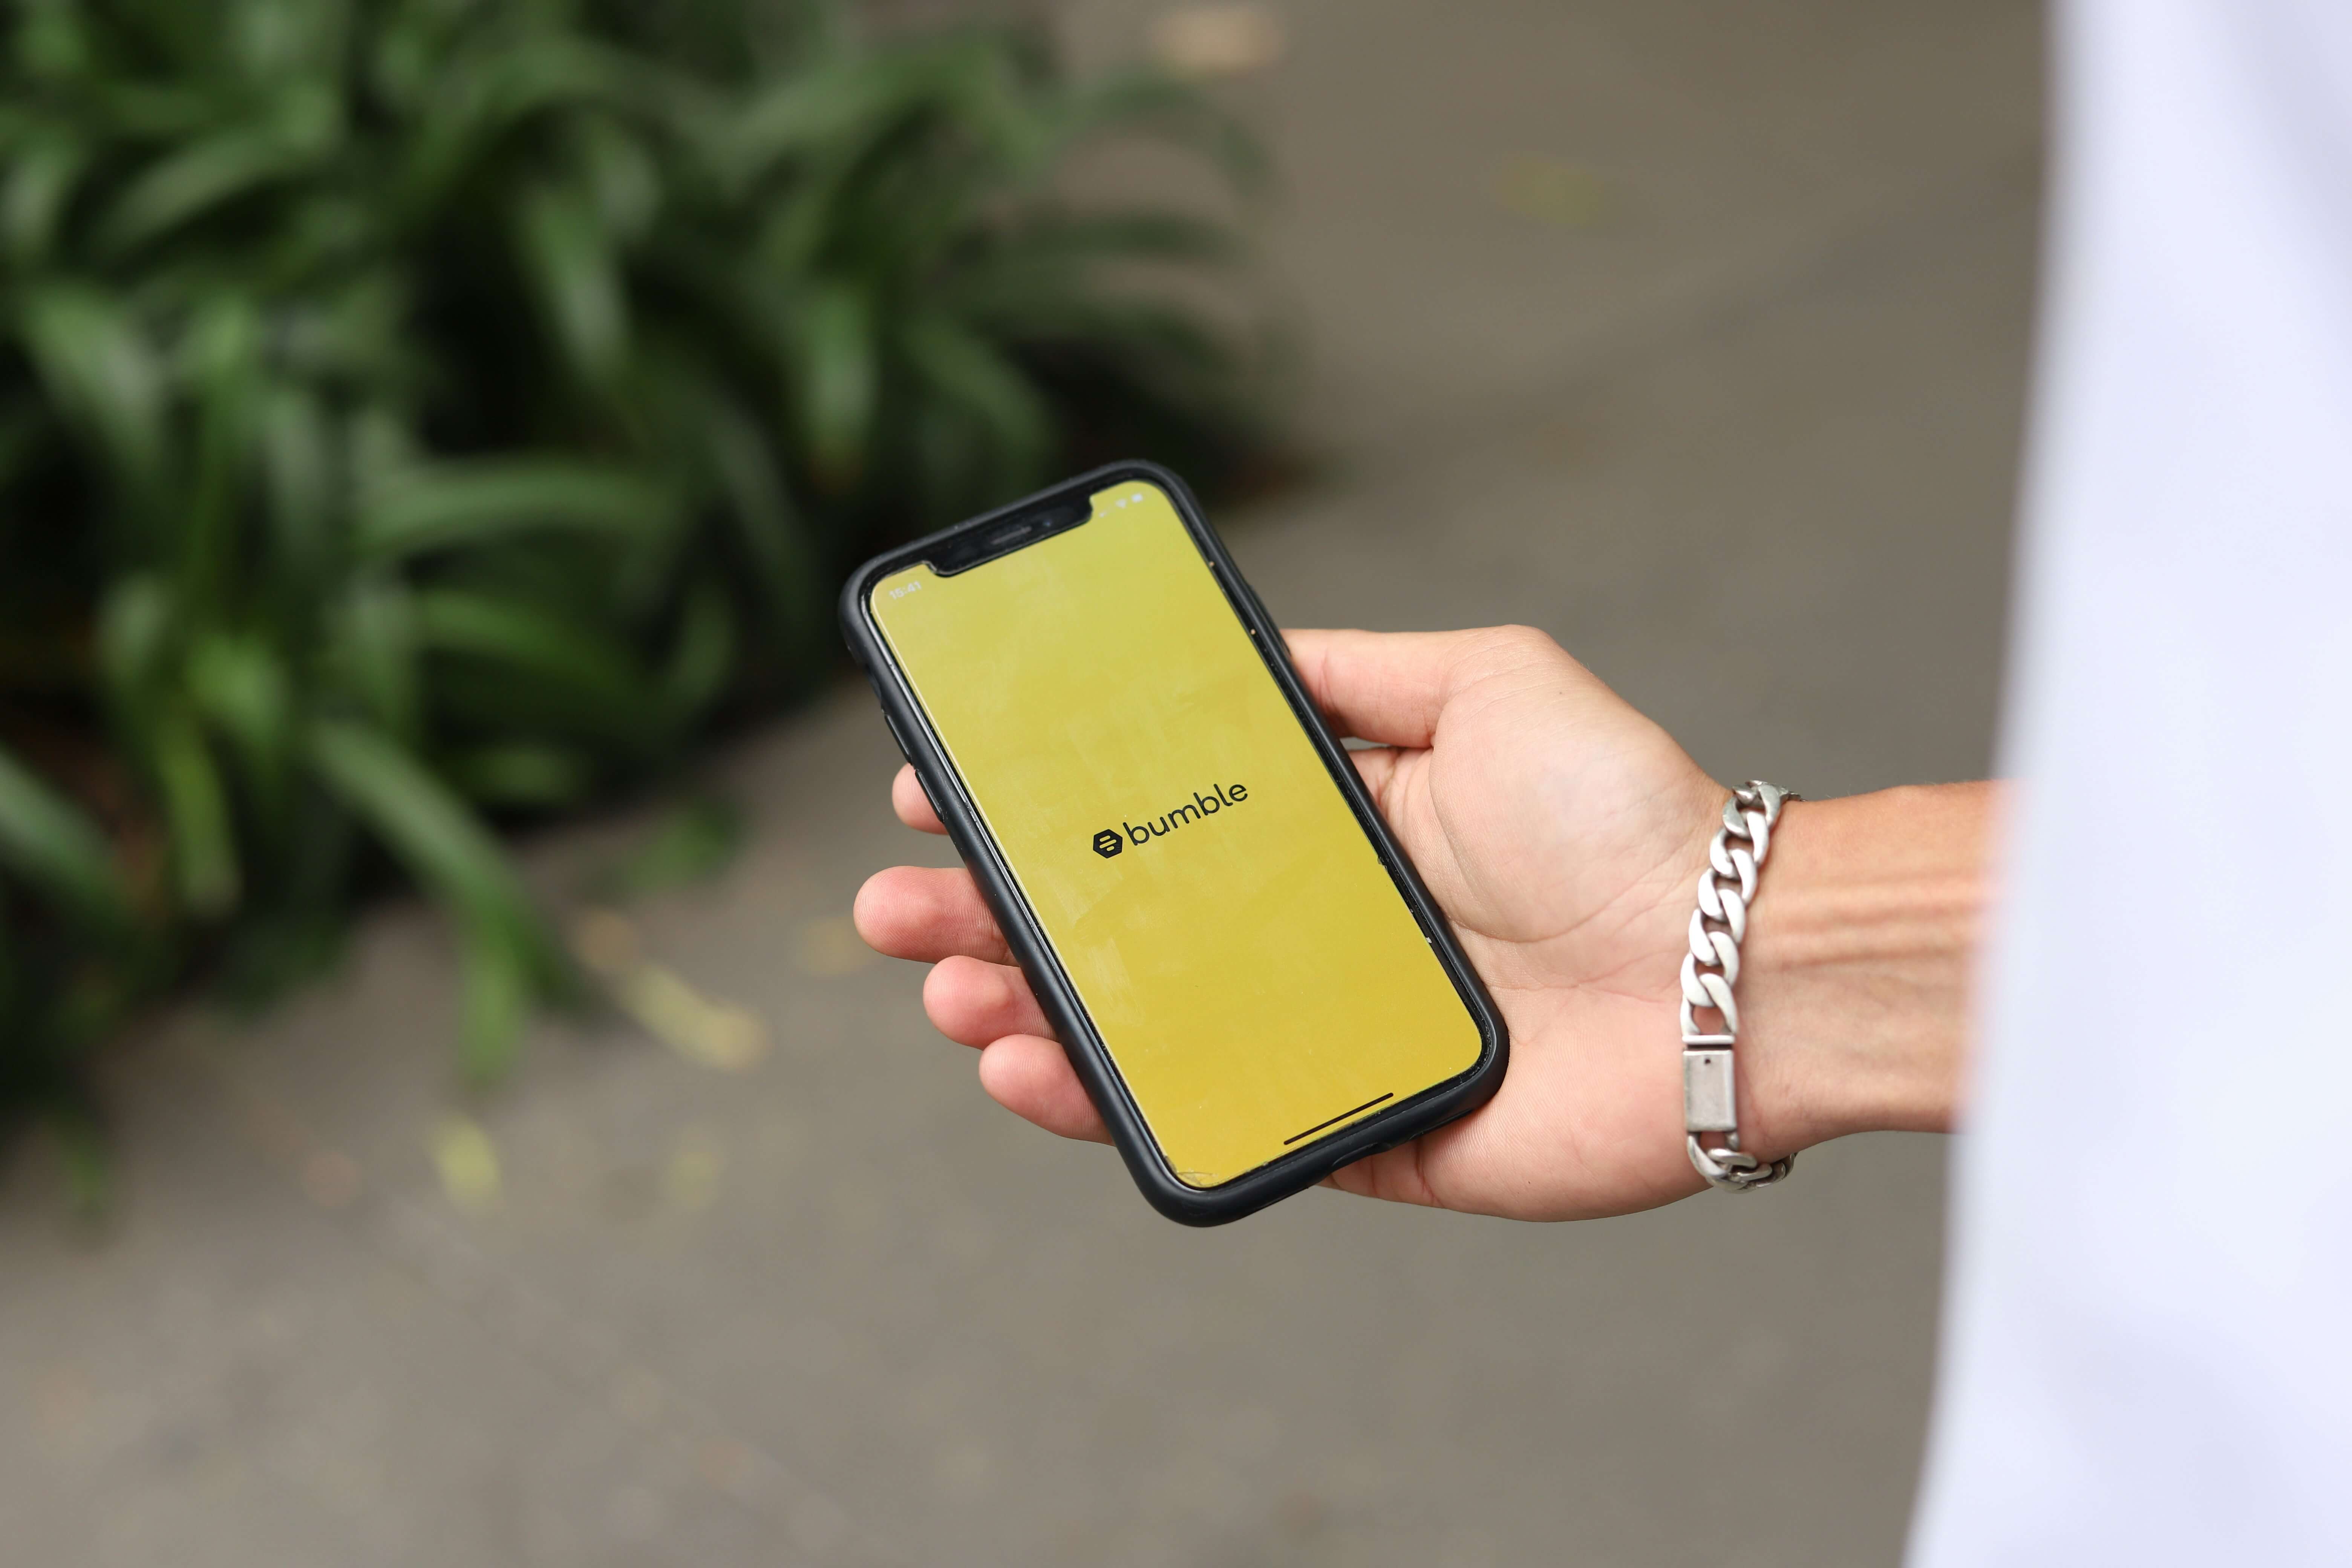 A hand holding a phone with the Bumble dating app on it.